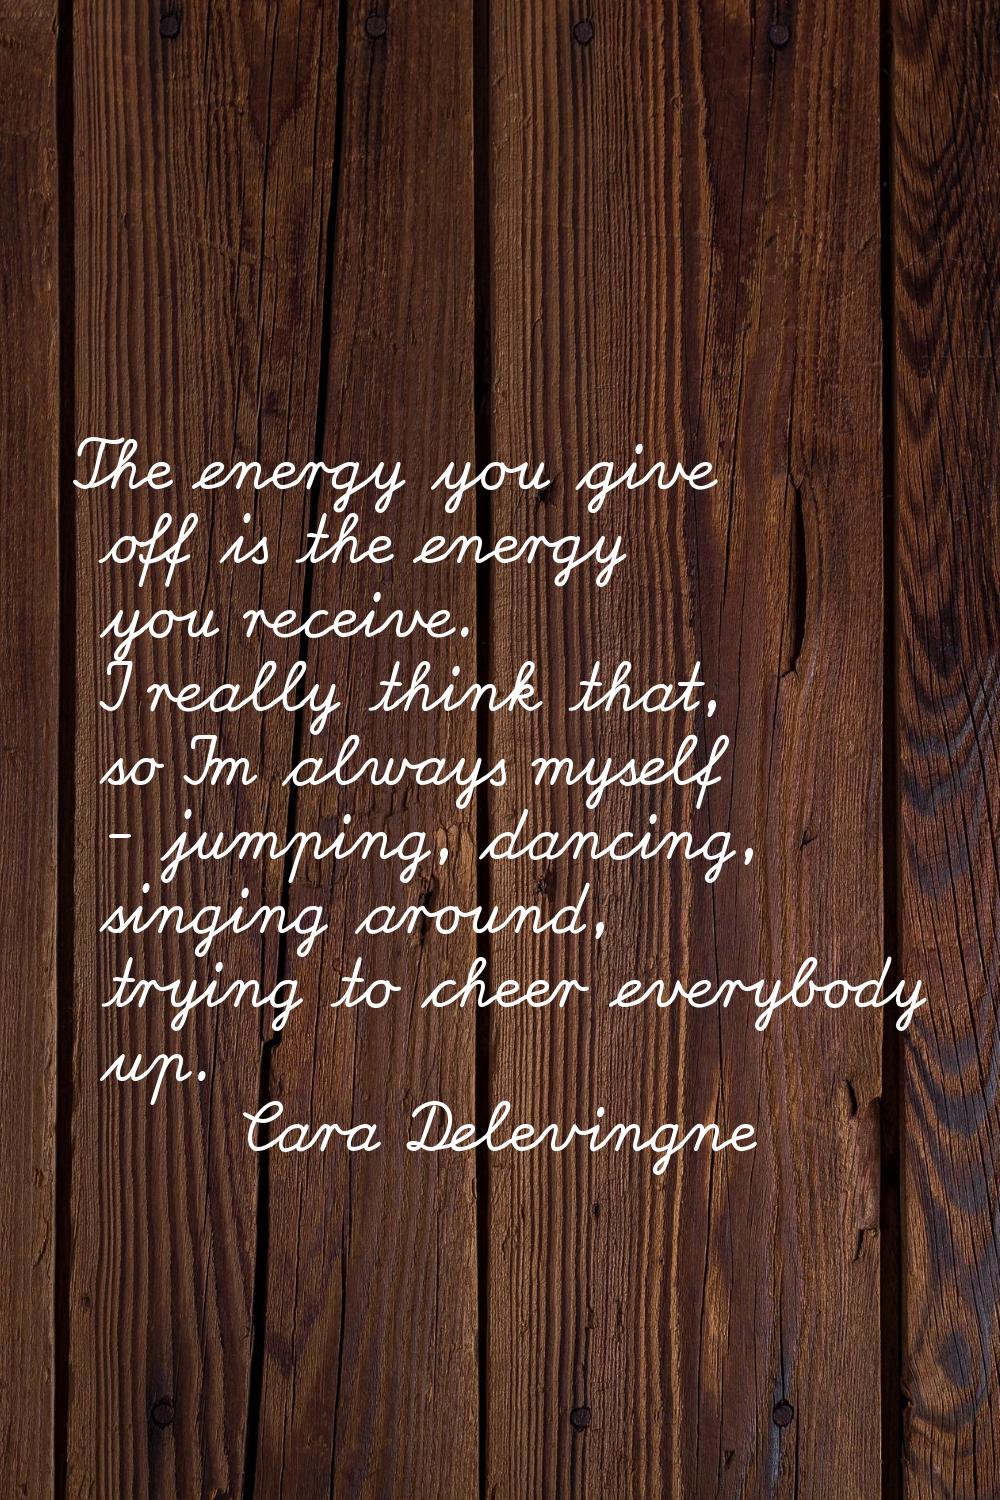 The energy you give off is the energy you receive. I really think that, so I'm always myself - jump